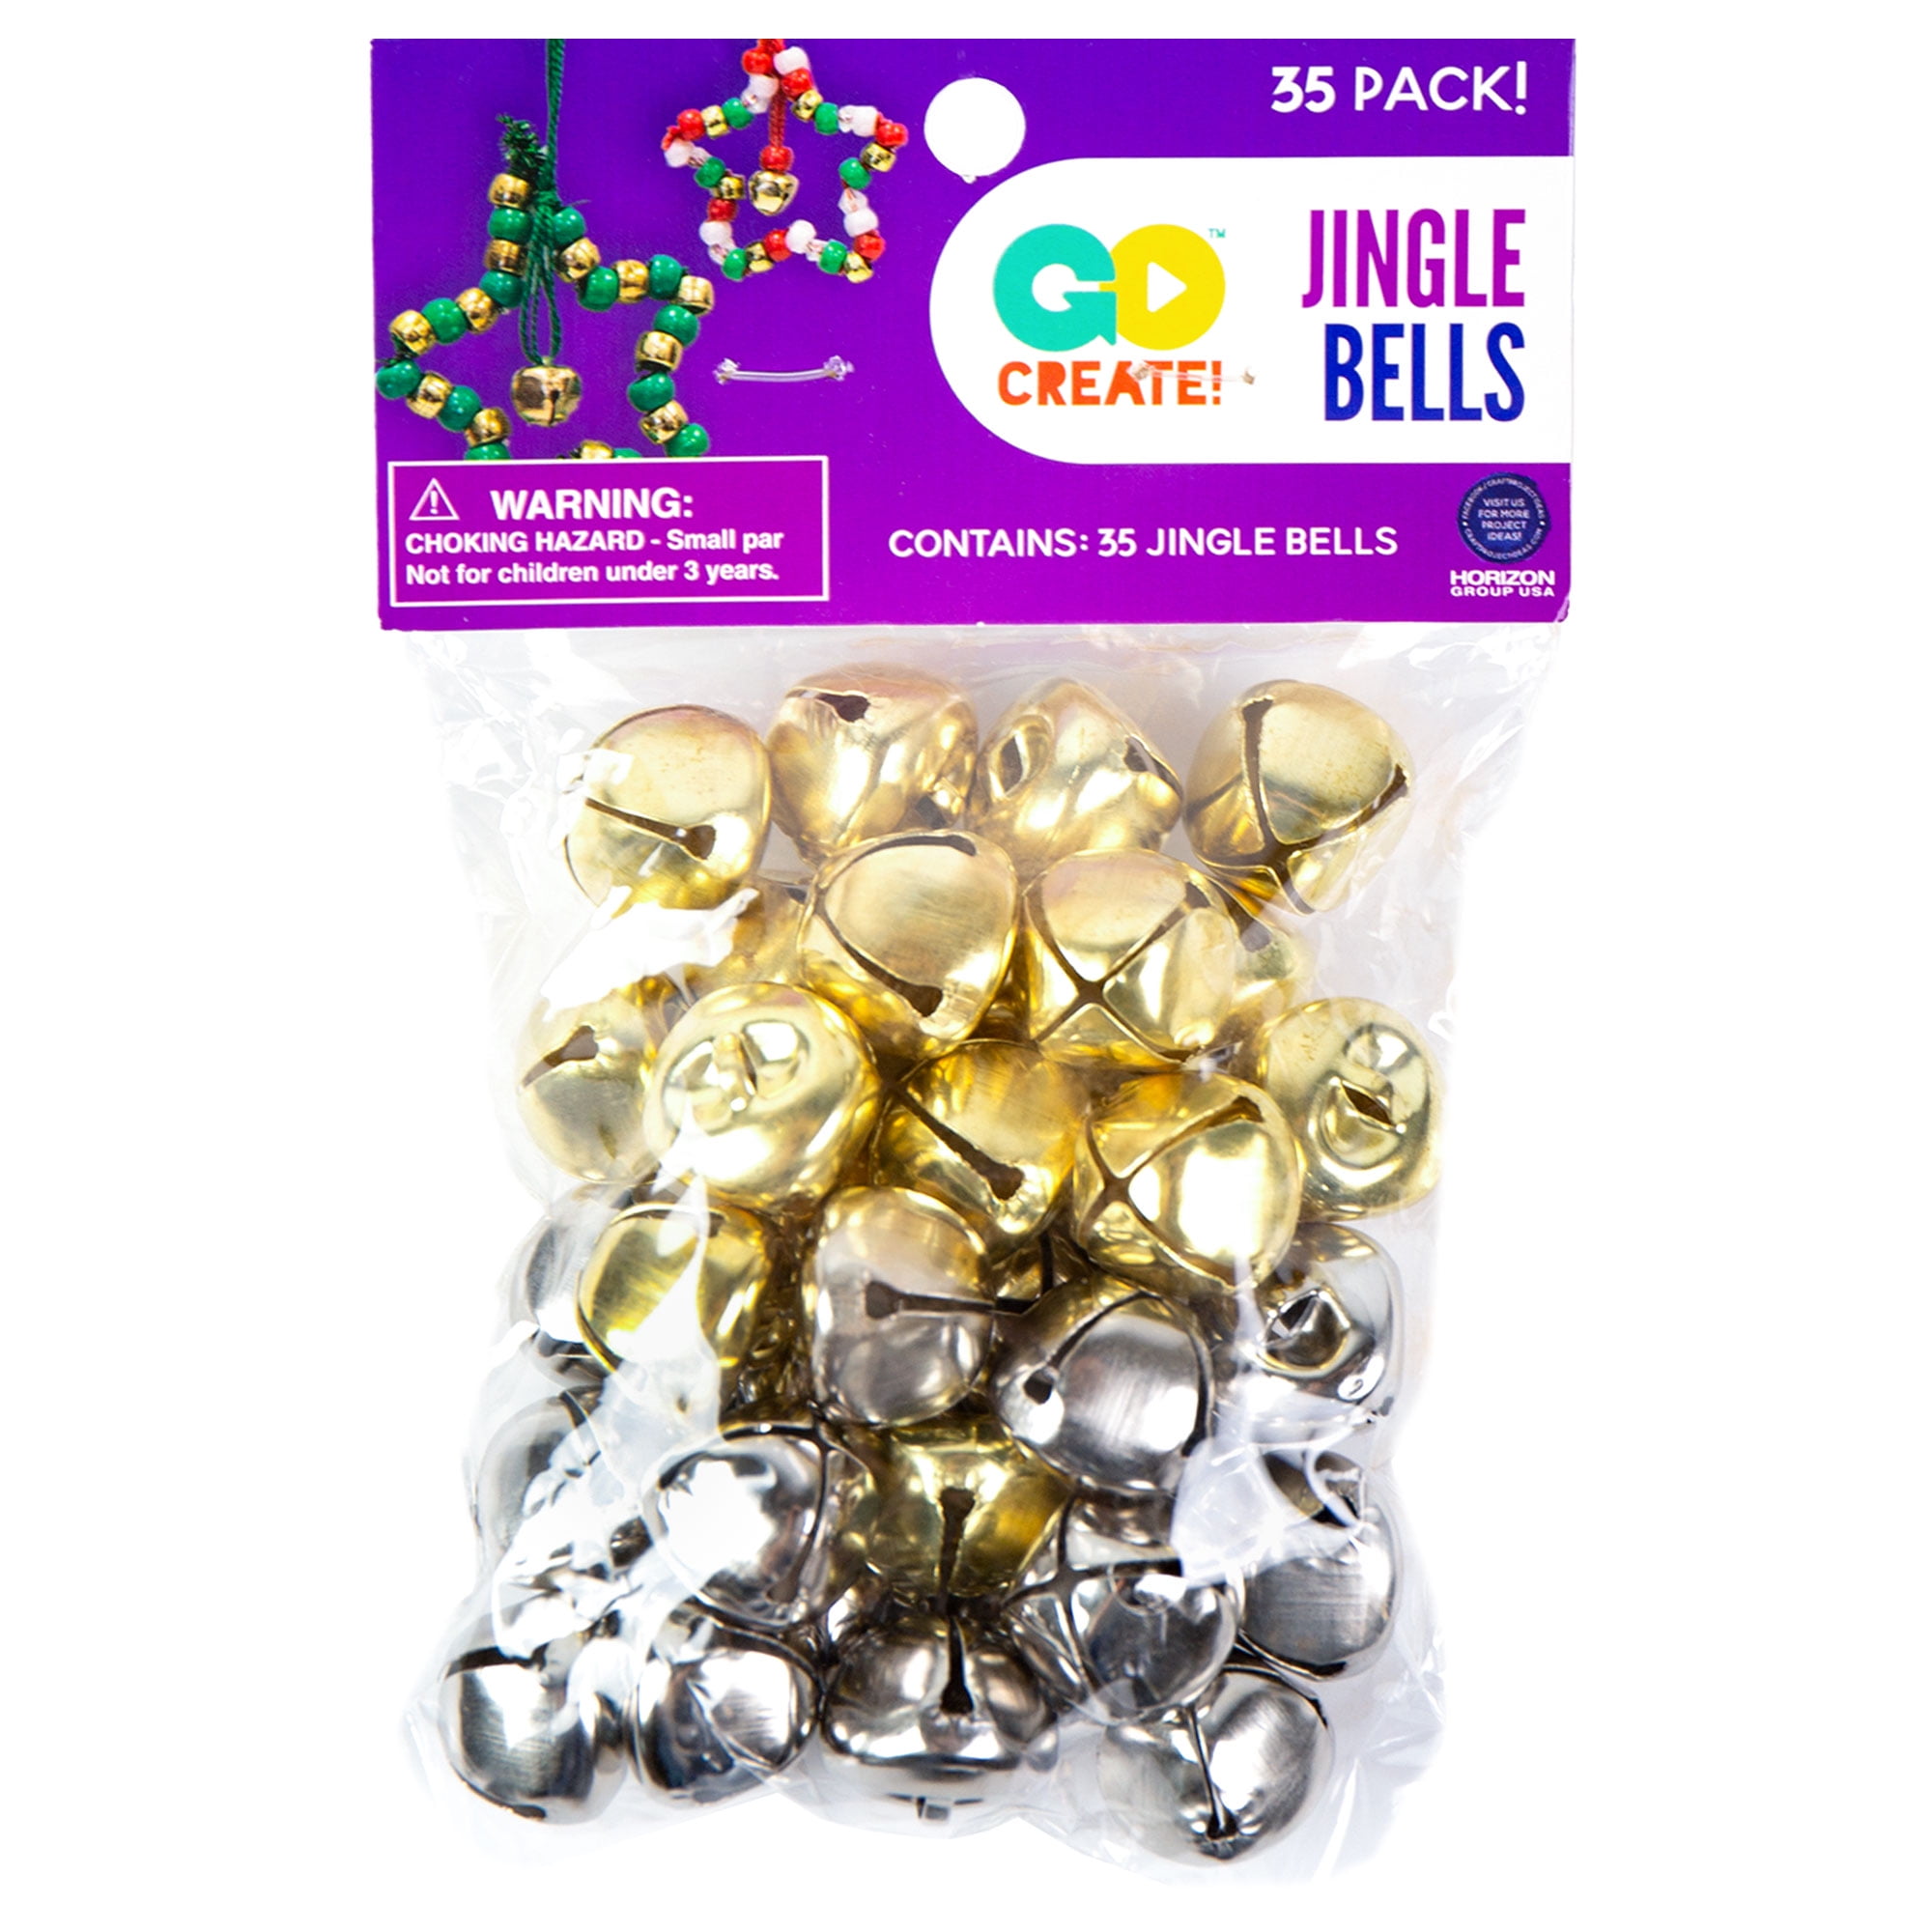 200pcs Mini Christmas Jingle Bells Bulk for DIY Craft Assorted Loose Beads Jewelry Charms Coloful Bells for Festival Wedding Decorations,8mm 